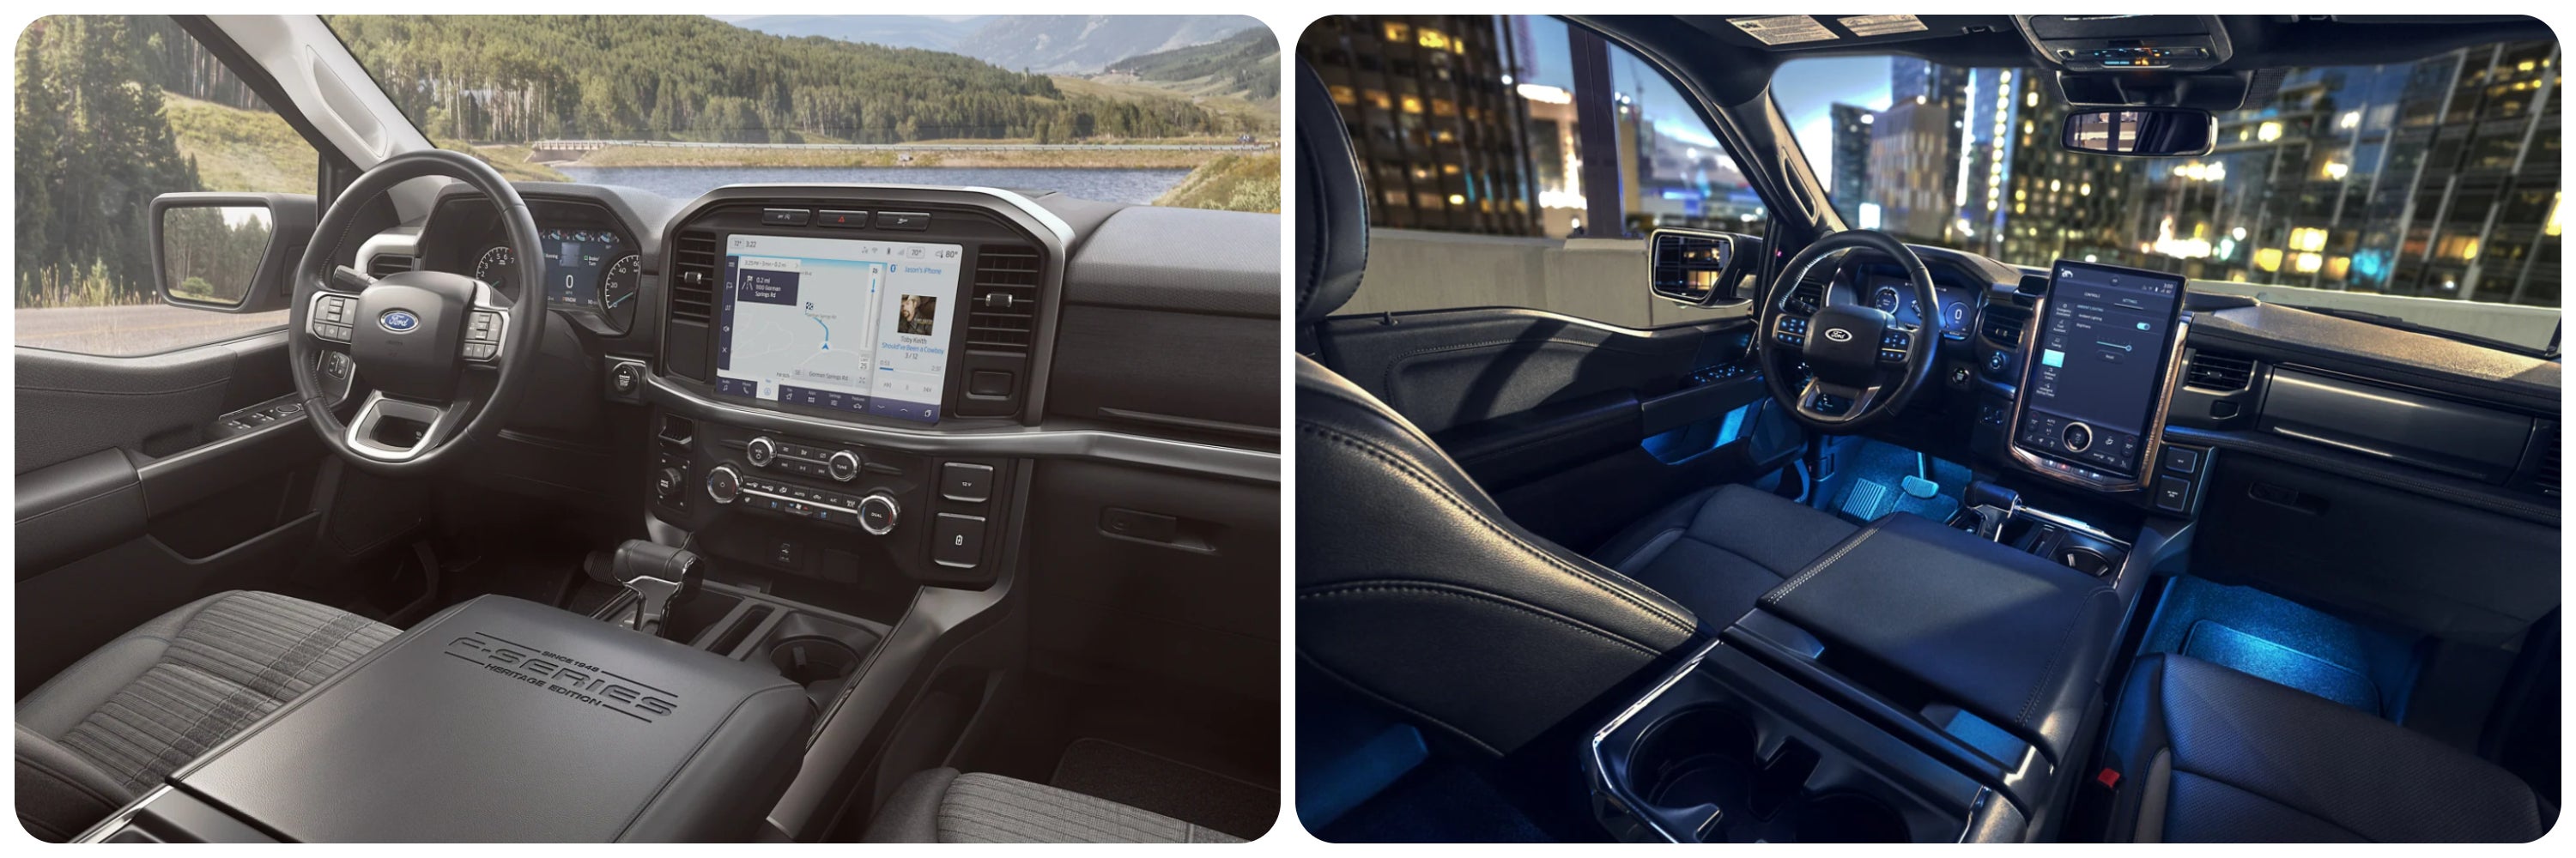 A view on the left of the dash and infotainment system of the 2023 Ford F-150, and the same view on the right of the 2023 Ford F-150 Lightning